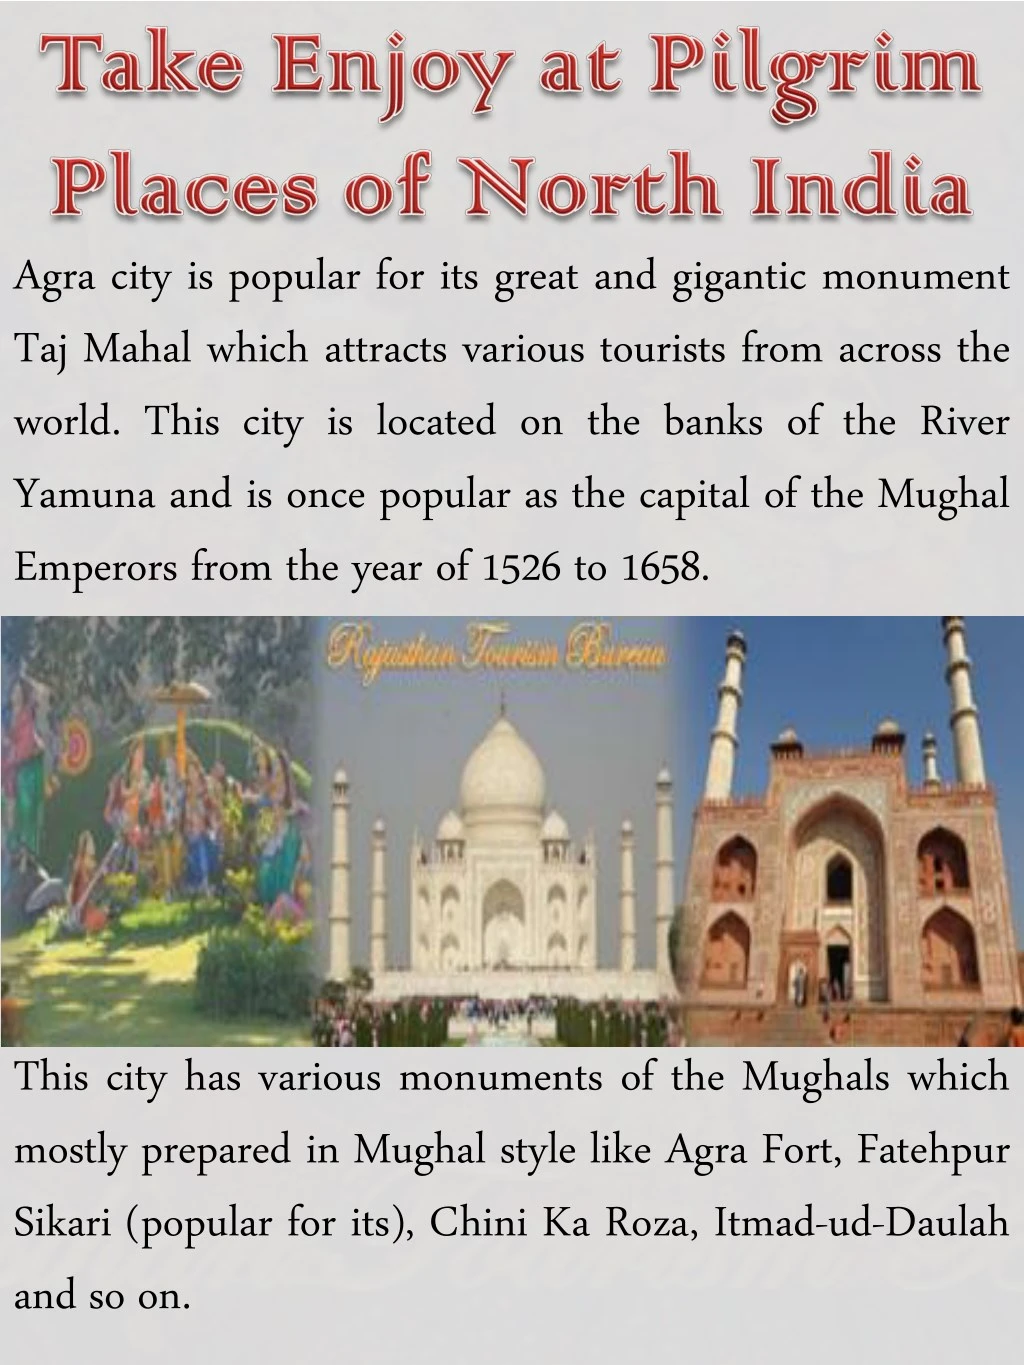 agra city is popular for its great and gigantic